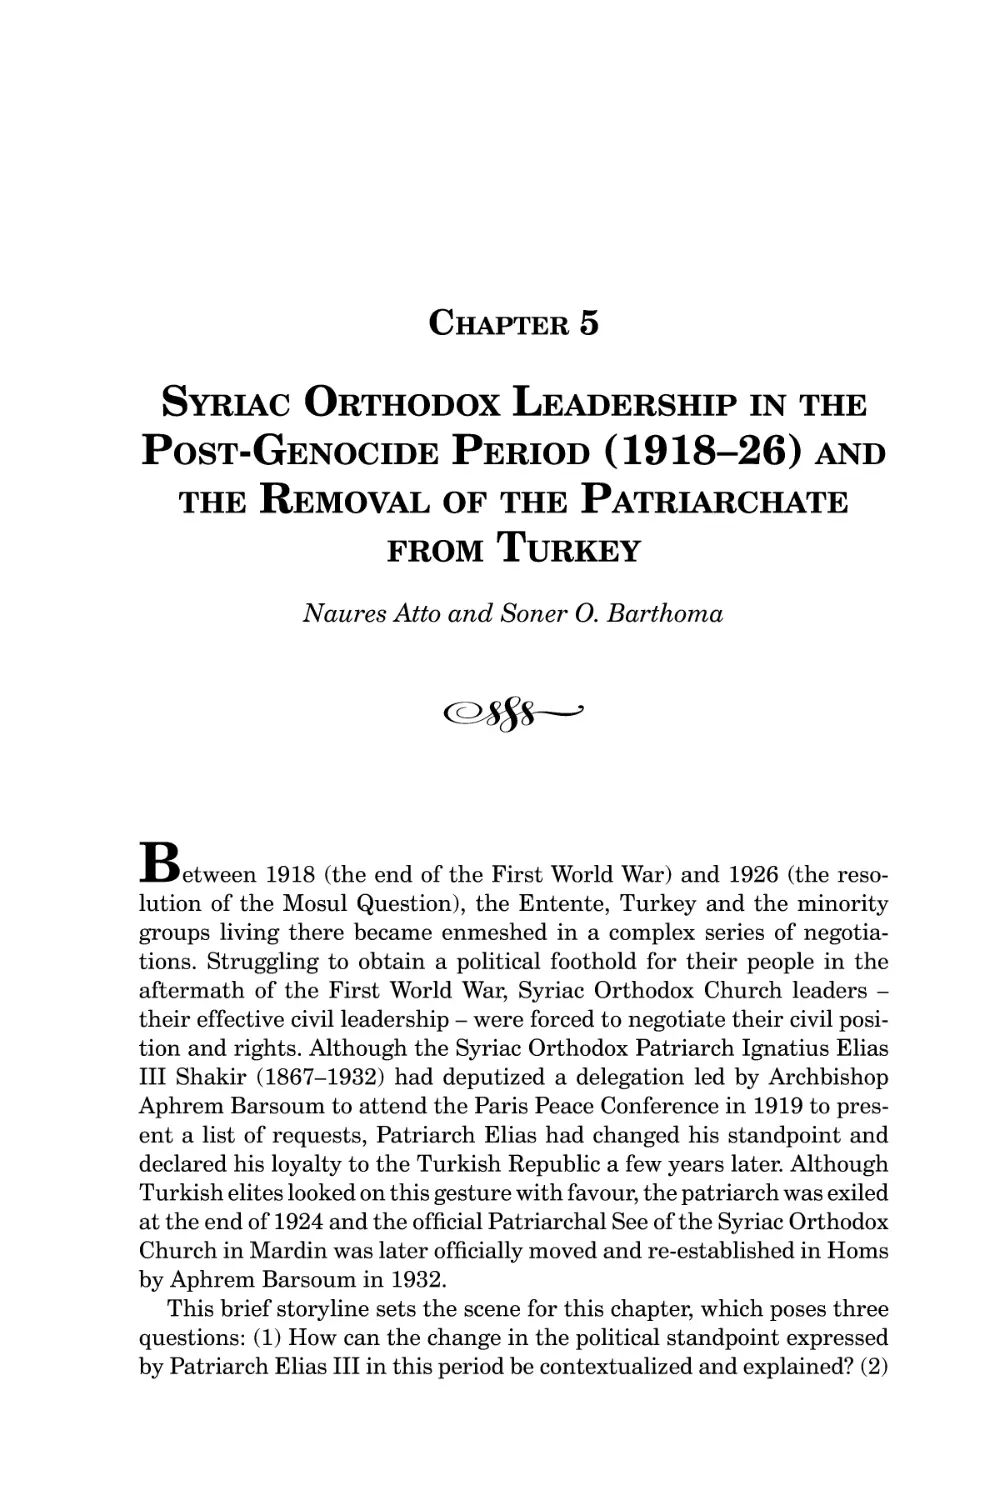 Chapter 5 Syriac Orthodox Leadership in the Post-Genocide Period (1918-26) and the Removal of the Patriarchate from Turkey